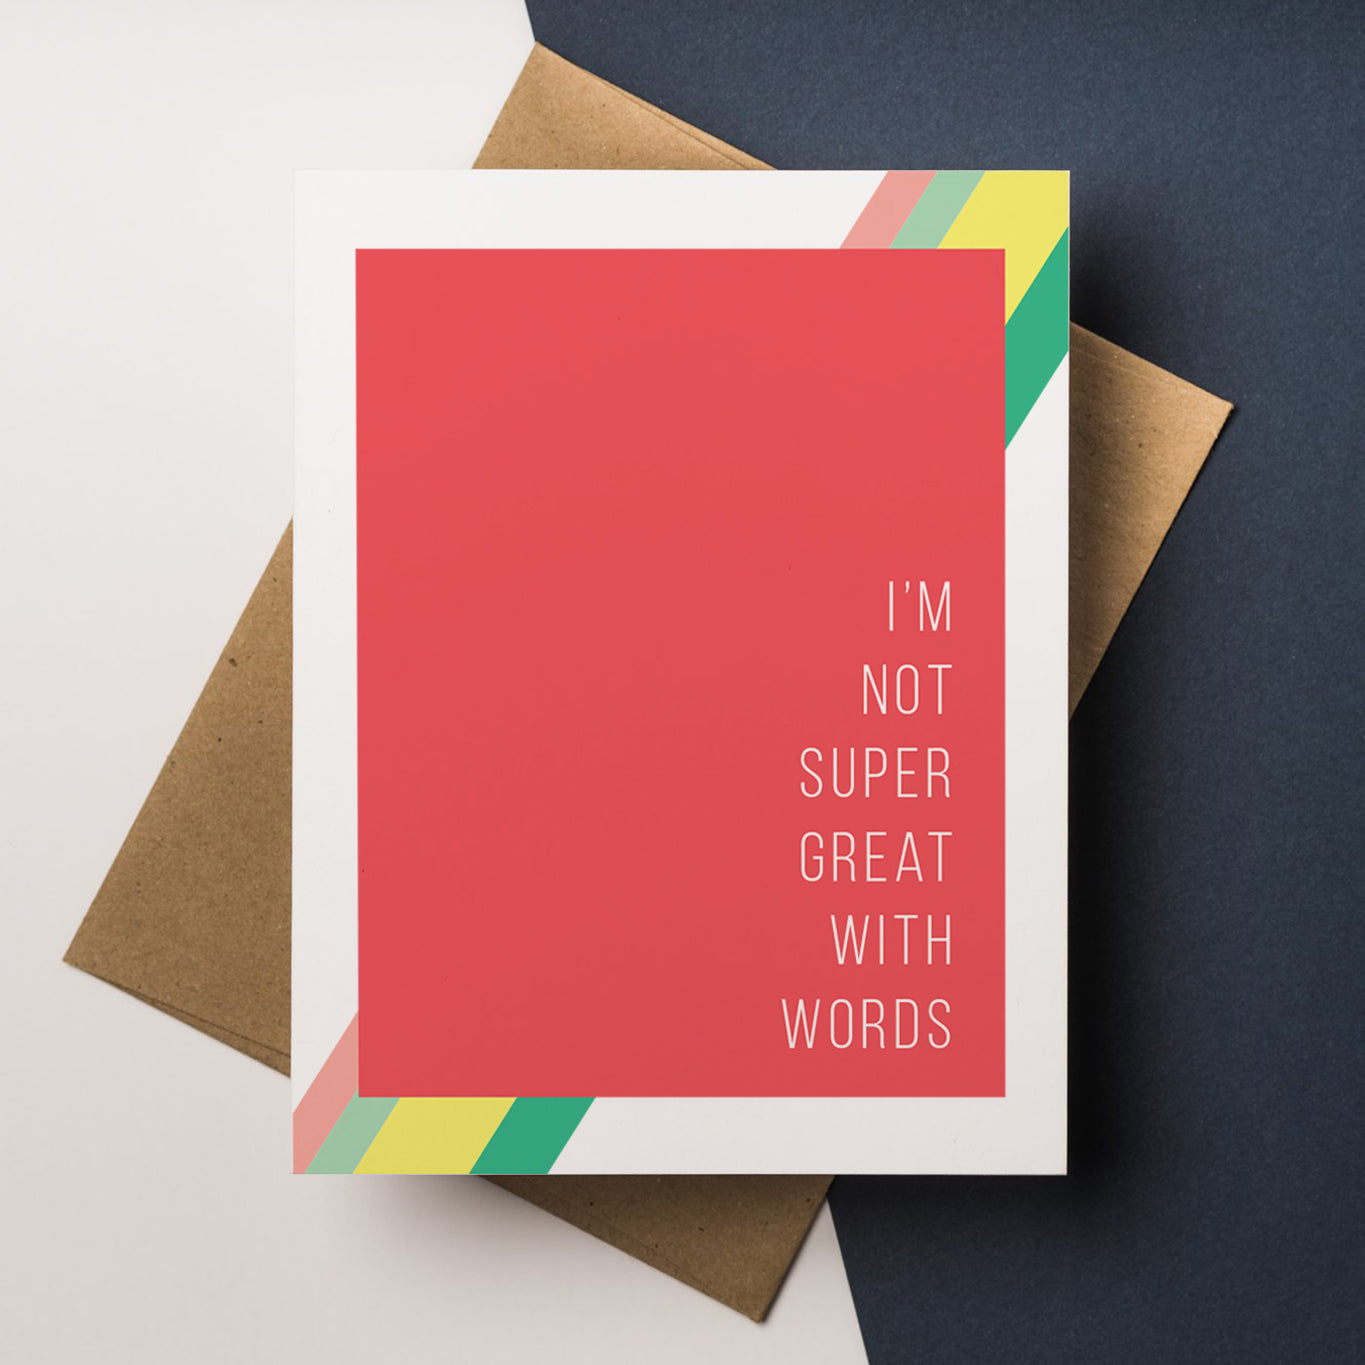 A funny sympathy greeting card or apology card that reads "I'm not super great with words"